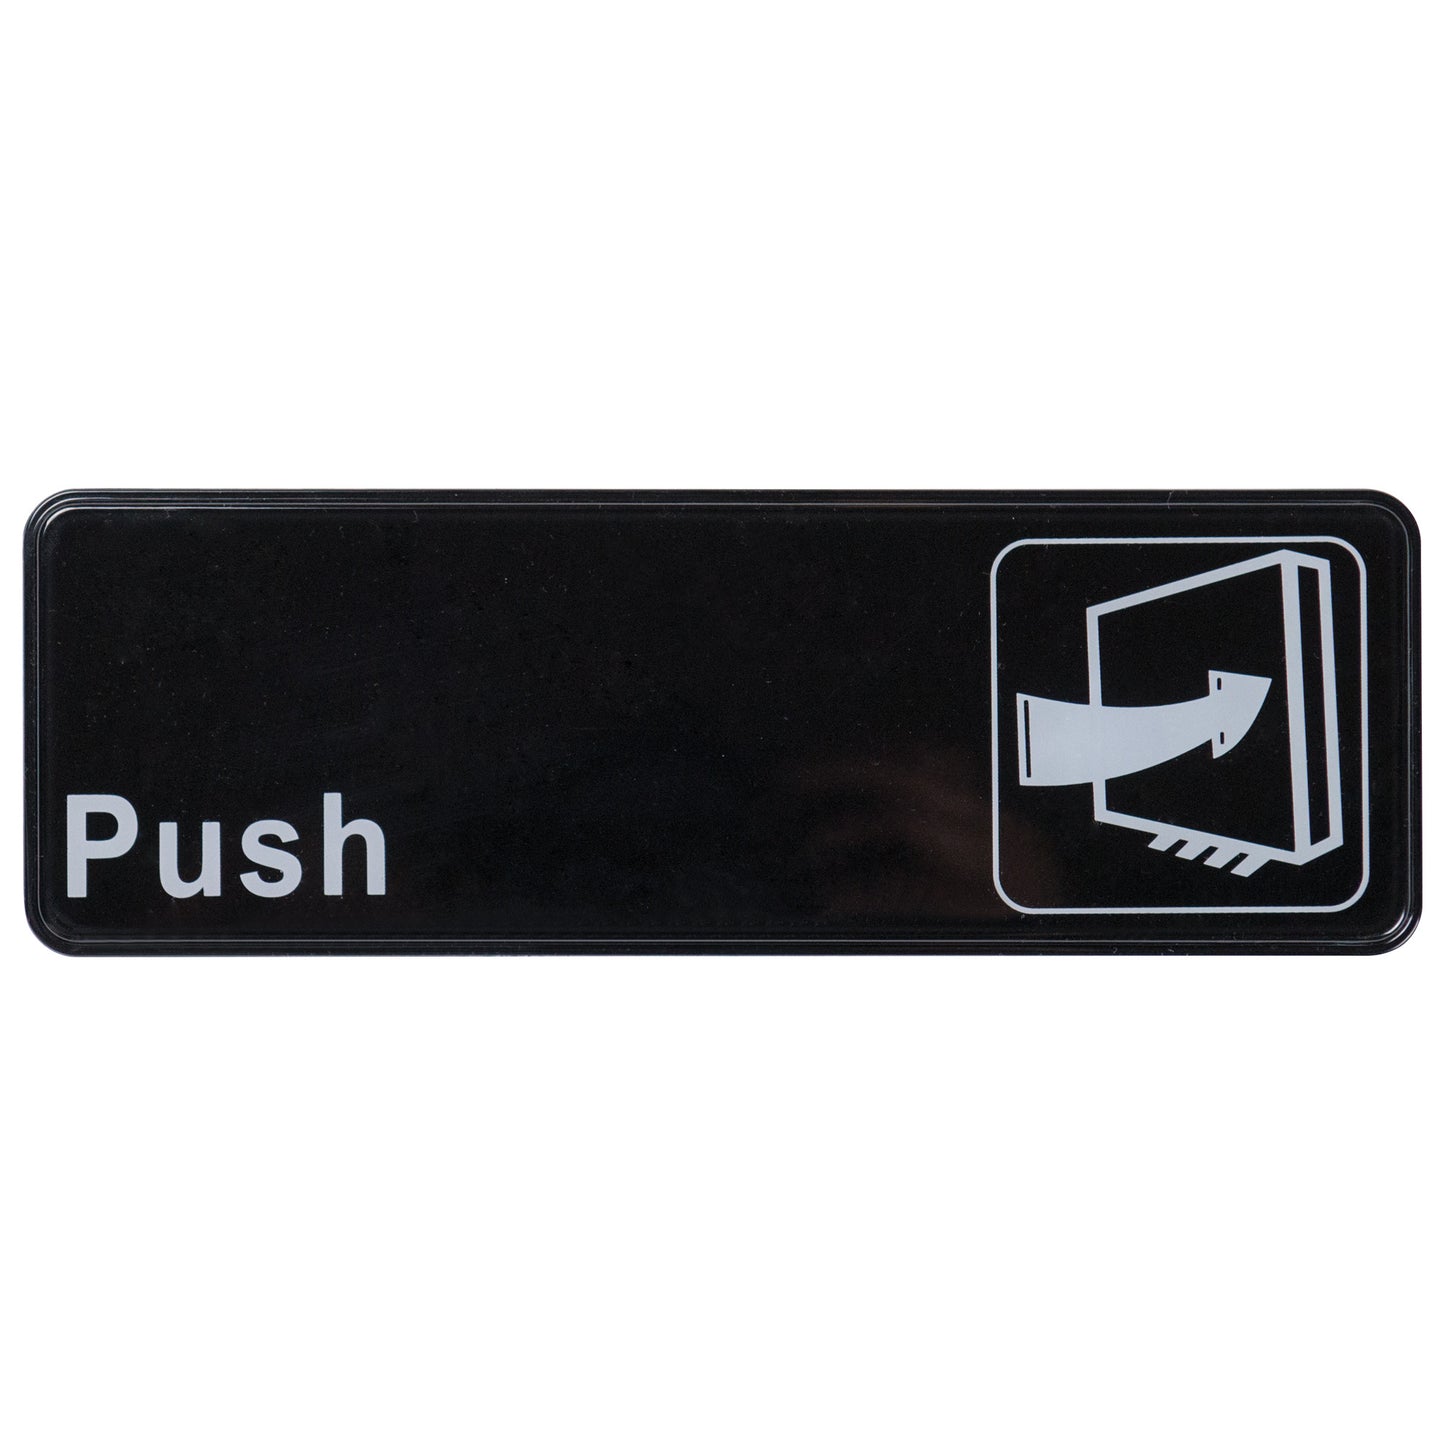 SGN-301 - Information Signs, 9"W x 3"H - SGN-301 -Push